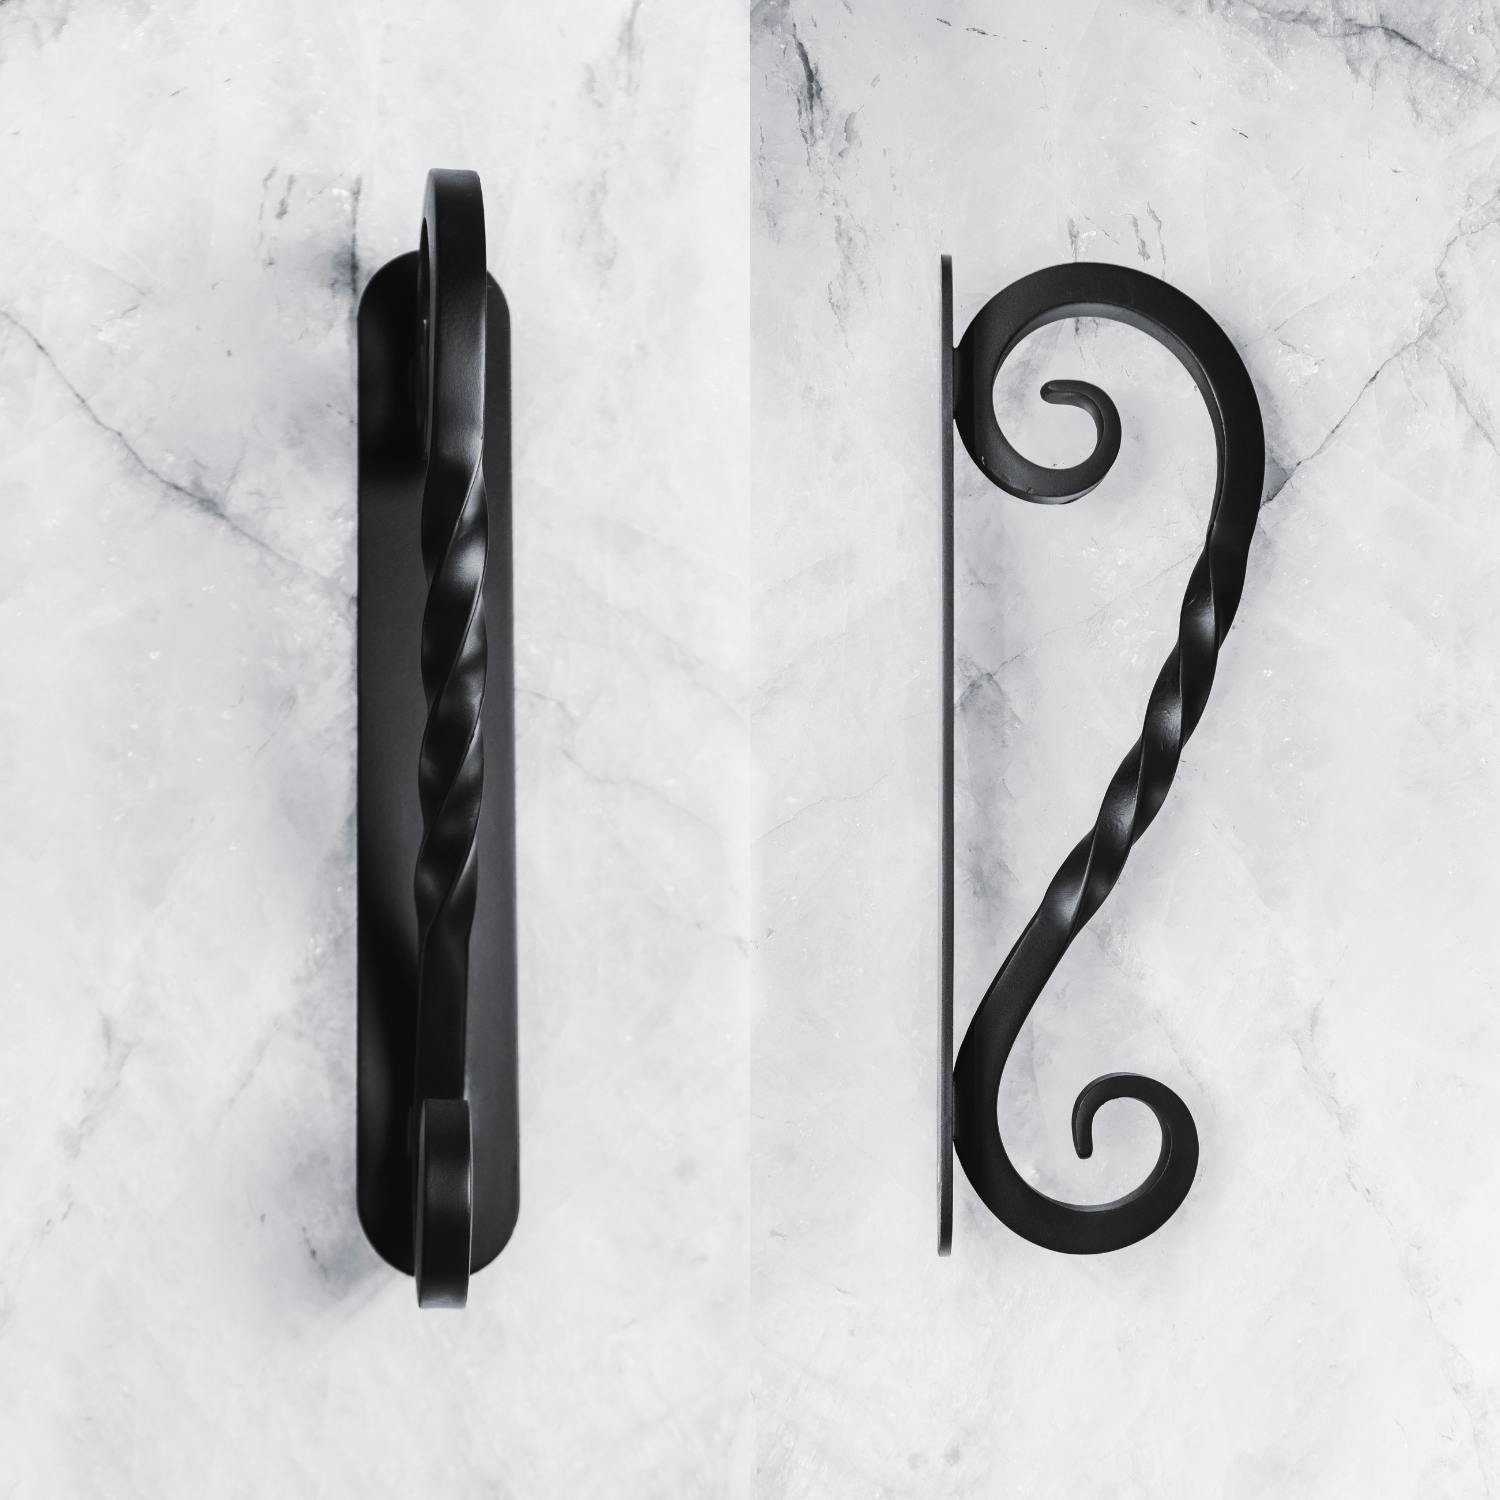 Iron door pulls with personalized monogram or emblem for added elegance